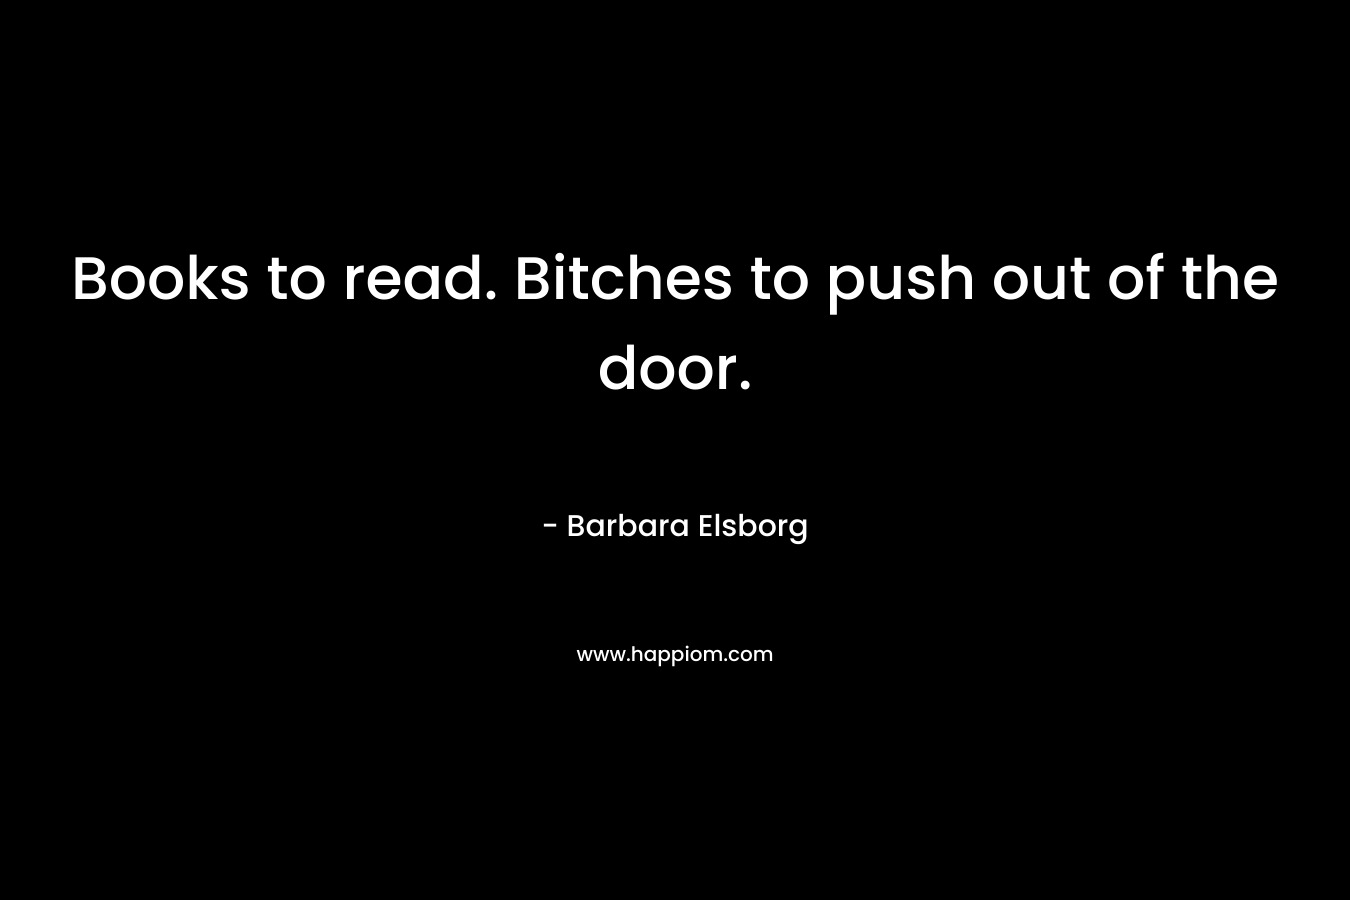 Books to read. Bitches to push out of the door. – Barbara Elsborg